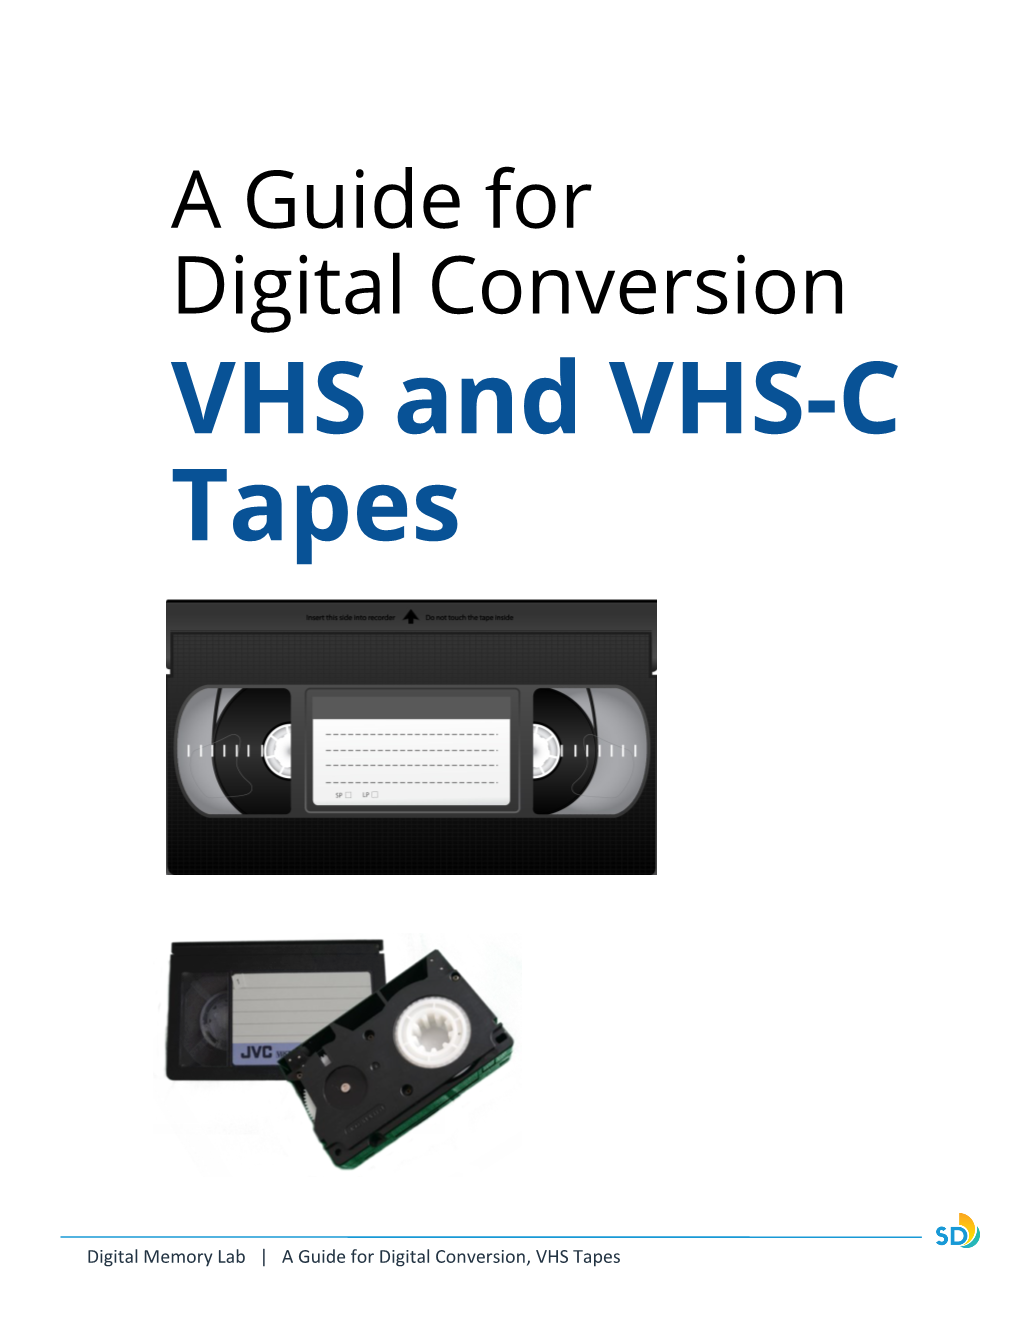 VHS and VHS-C Tapes